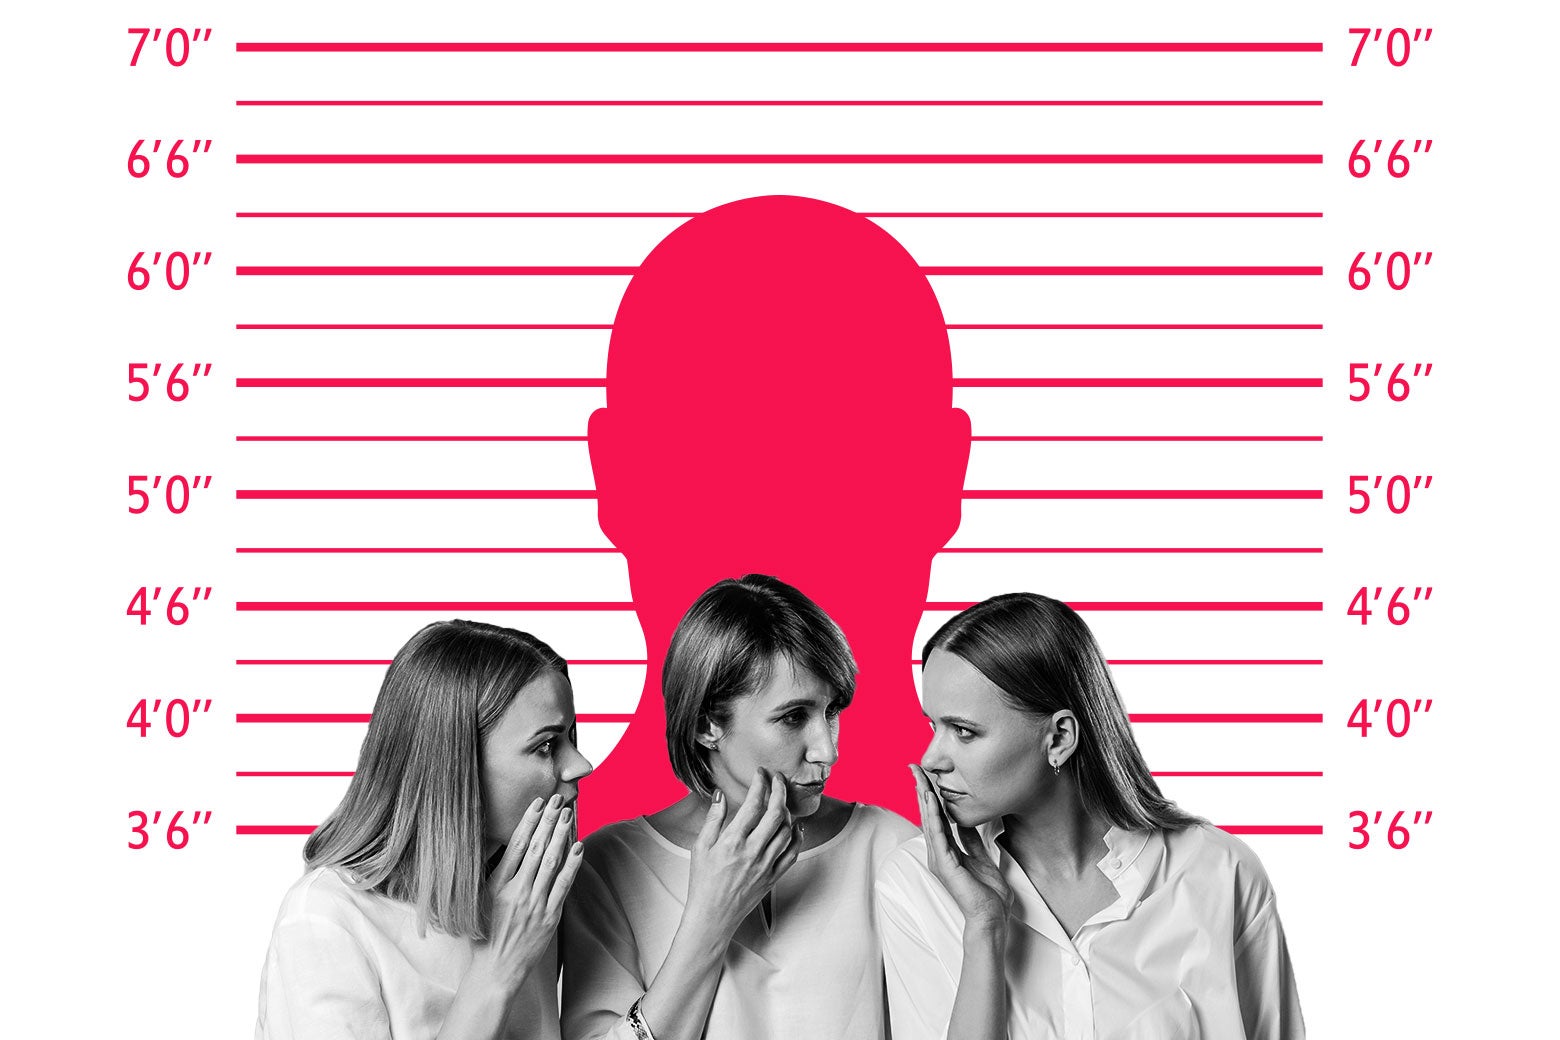 Three women whispering to each other. Behind them is a photo of someone in jail.